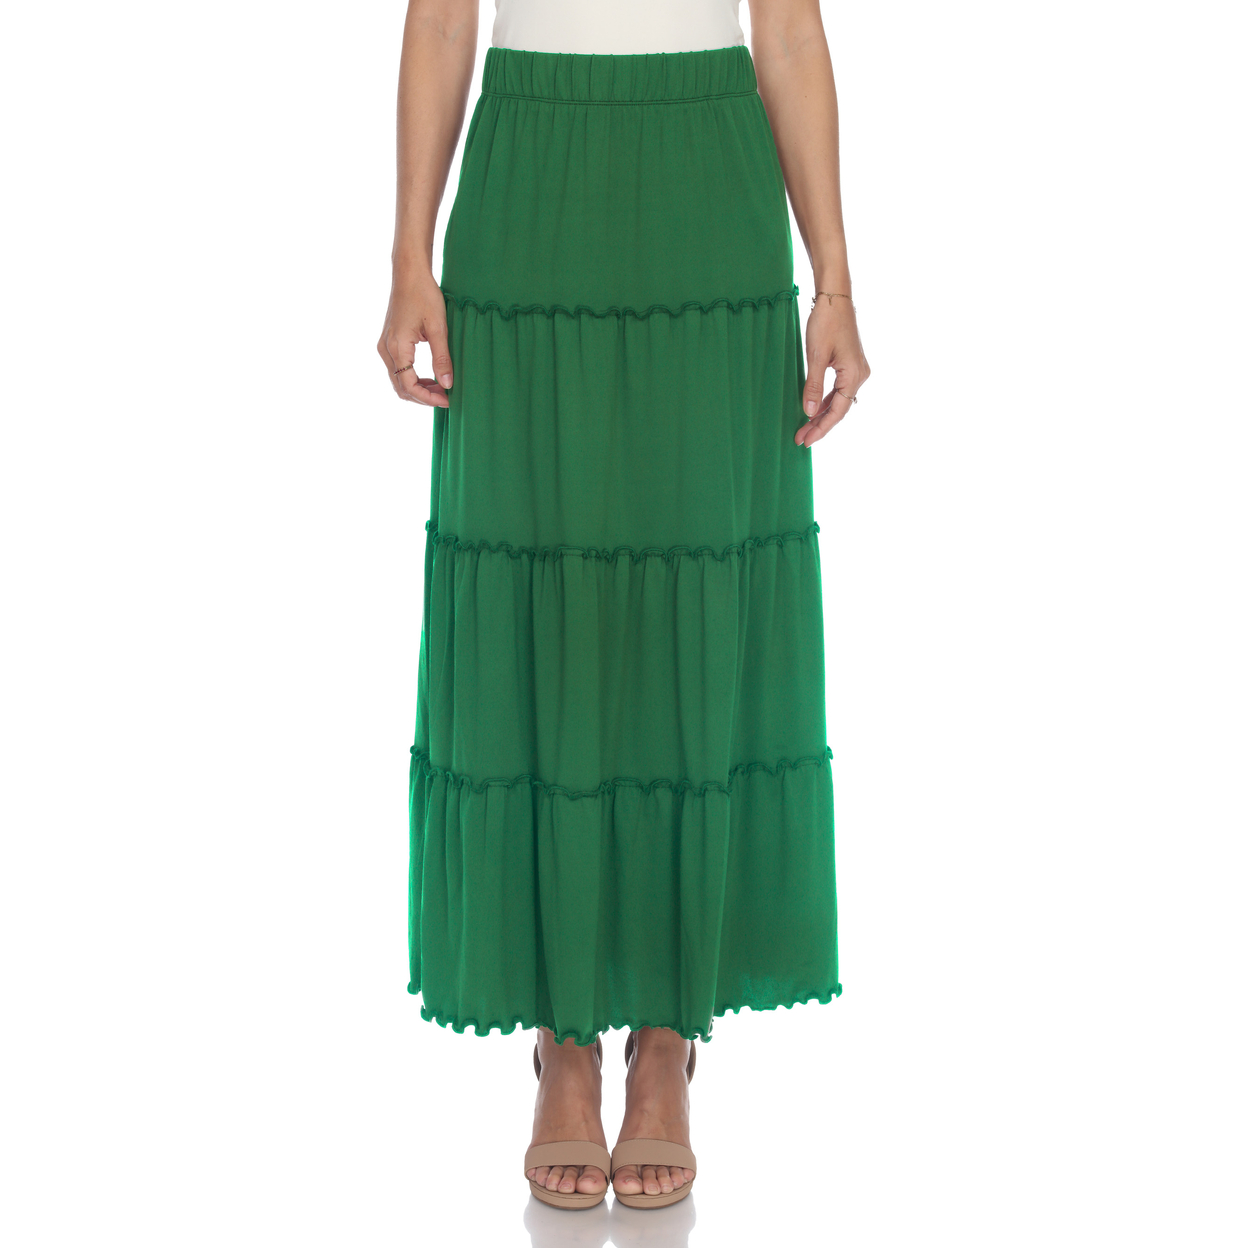 White Mark Women's Tiered Maxi Skirt With Pockets - Green, Small